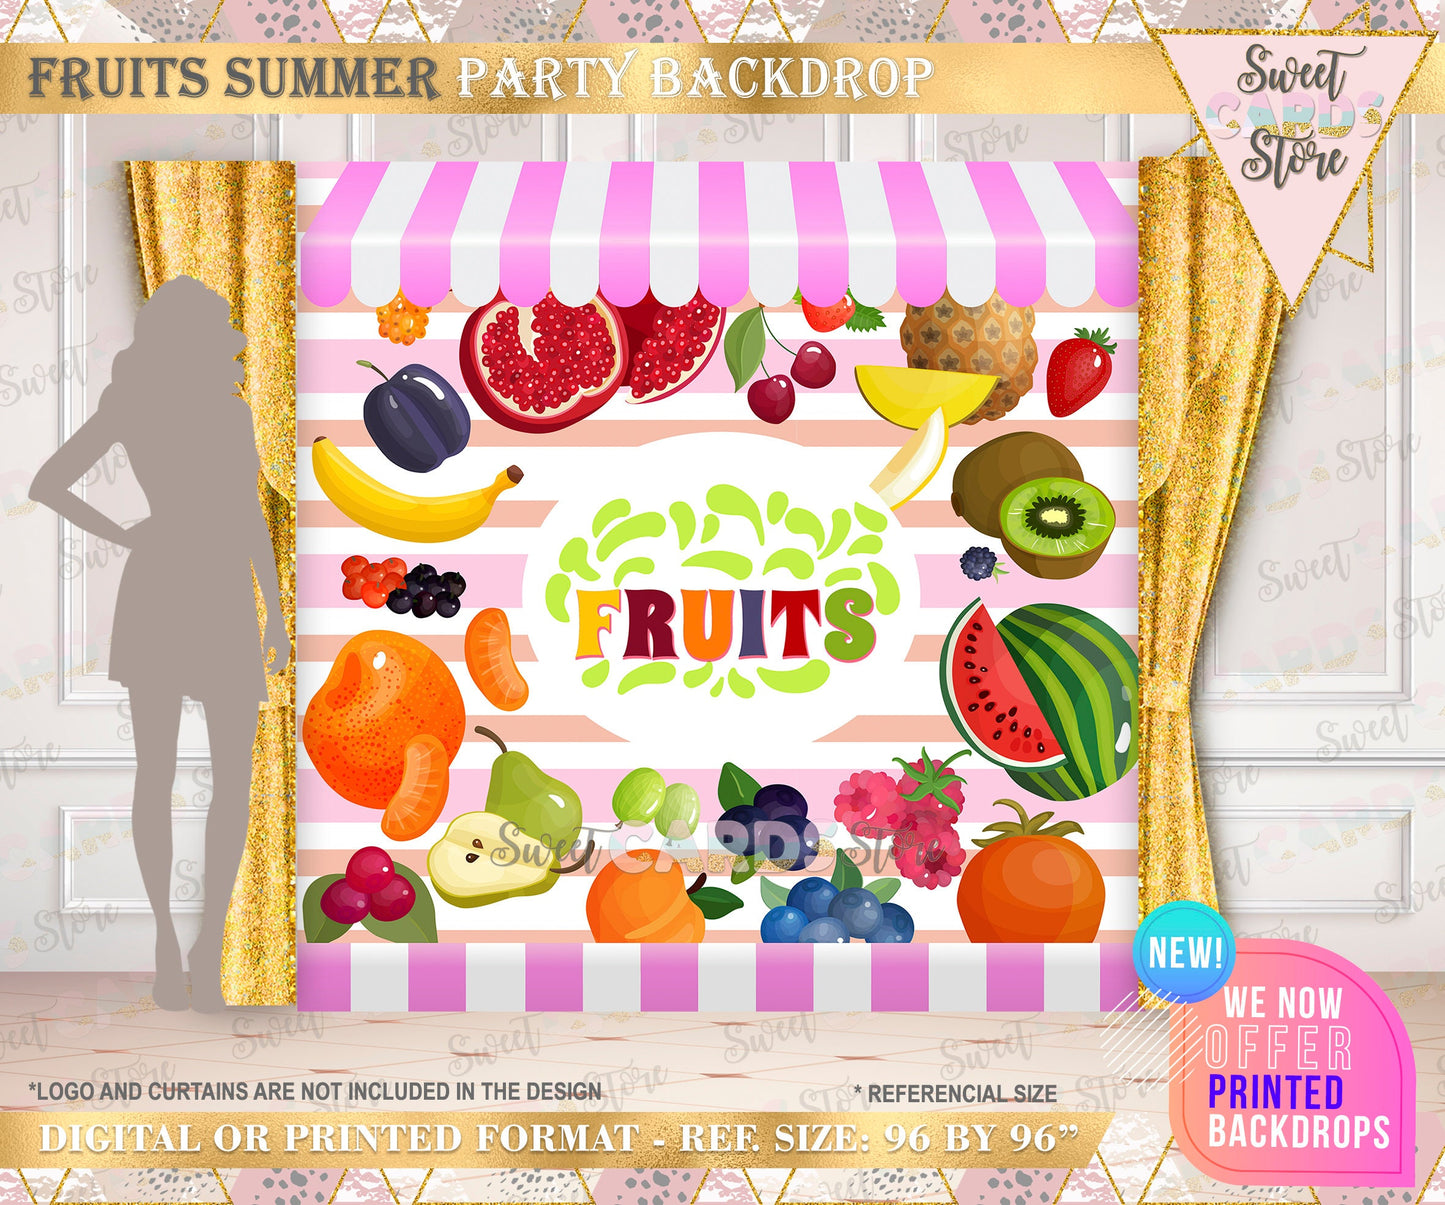 Fruit stand party backdrop, fruits tropical party backdrop, fruit stand backdrop, tropical summer party backdrop, tropical fruits banner